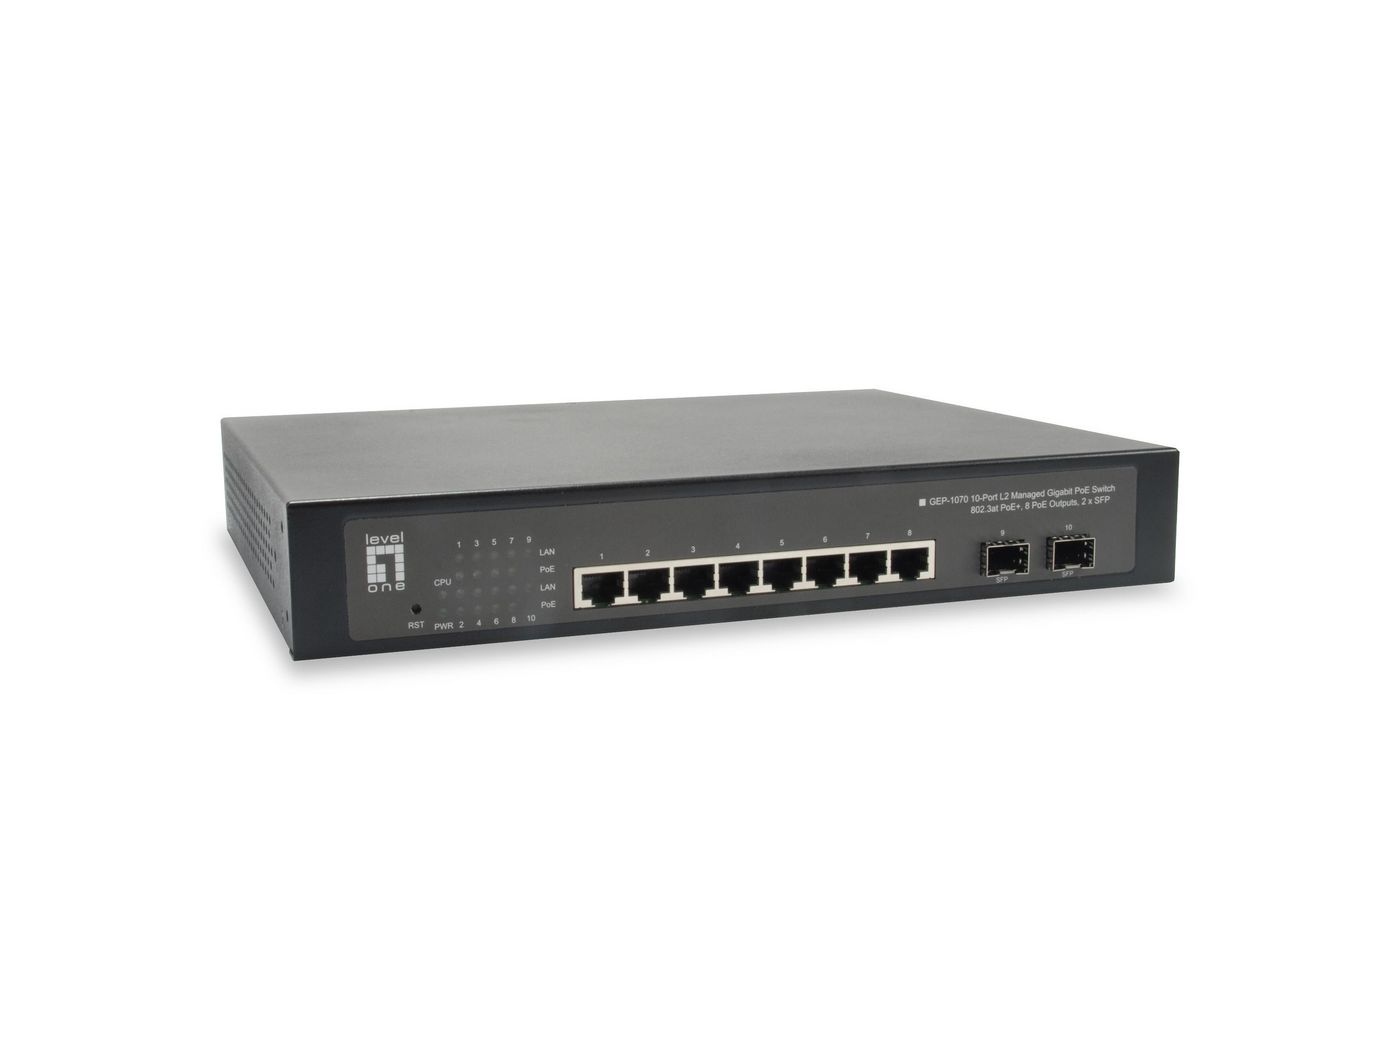 LevelOne GEP-1070 10-PORT MANAGED GBE SWITCH WIT 